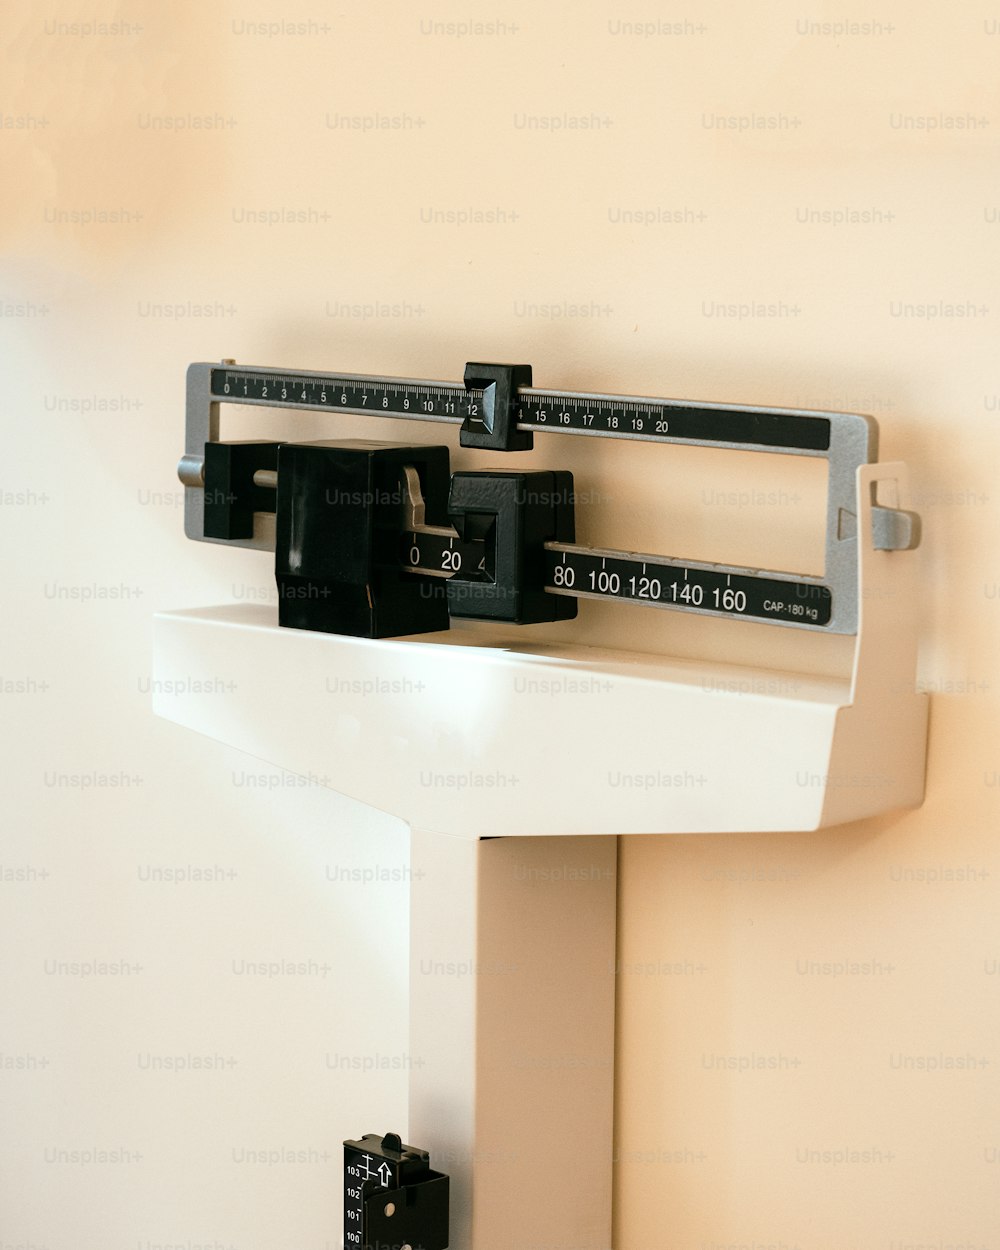 Weight Balance Pictures  Download Free Images on Unsplash